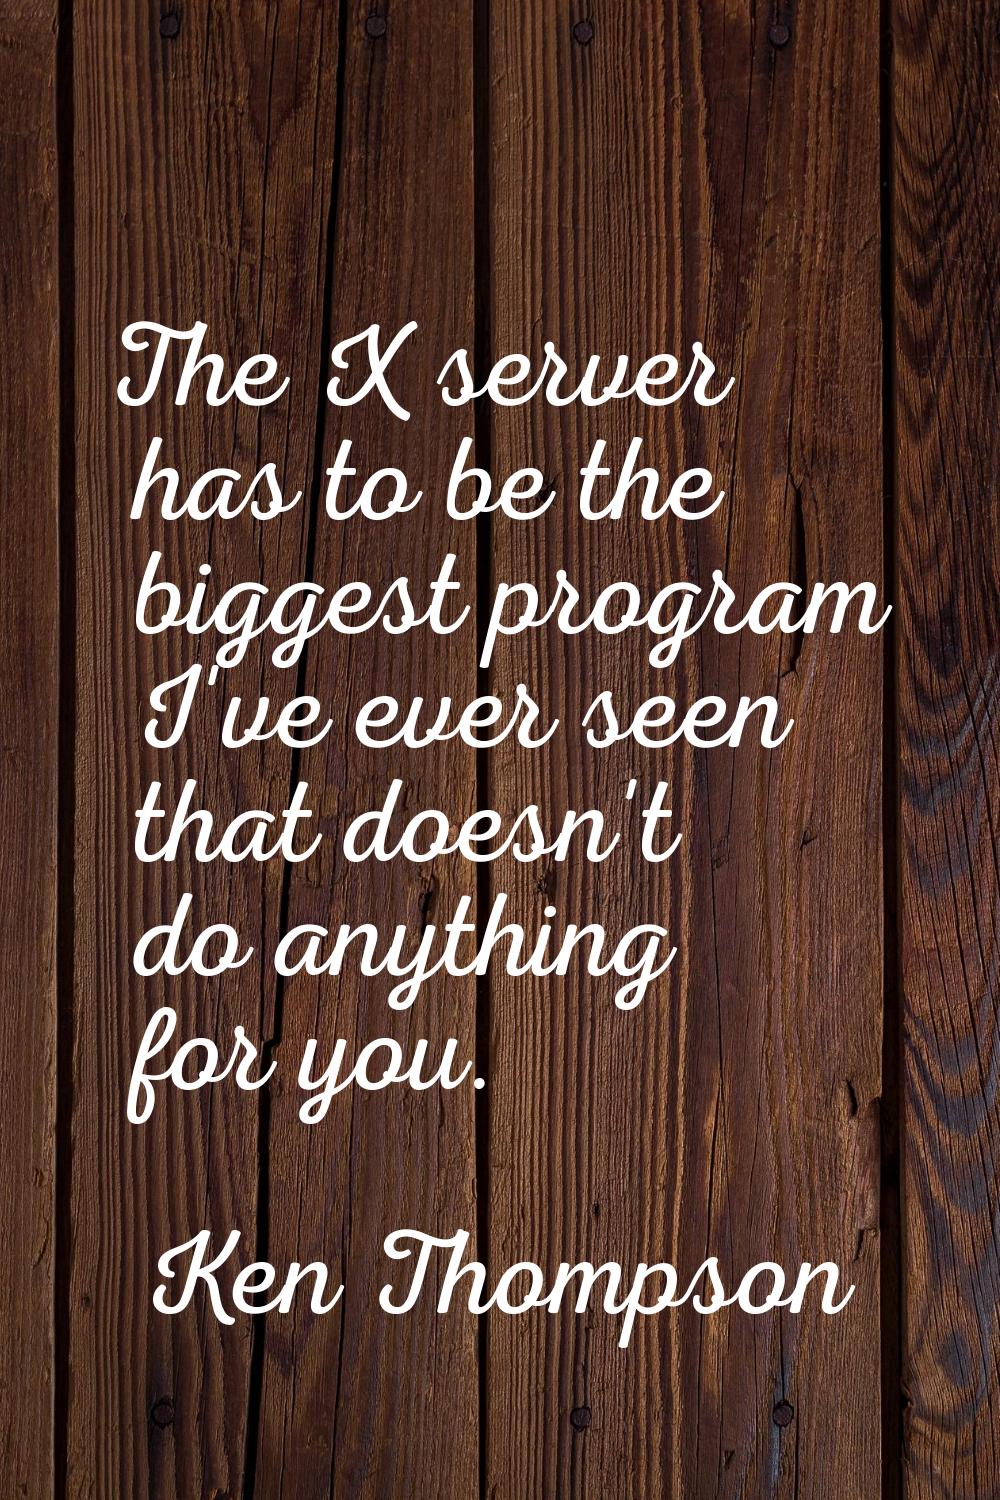 The X server has to be the biggest program I've ever seen that doesn't do anything for you.